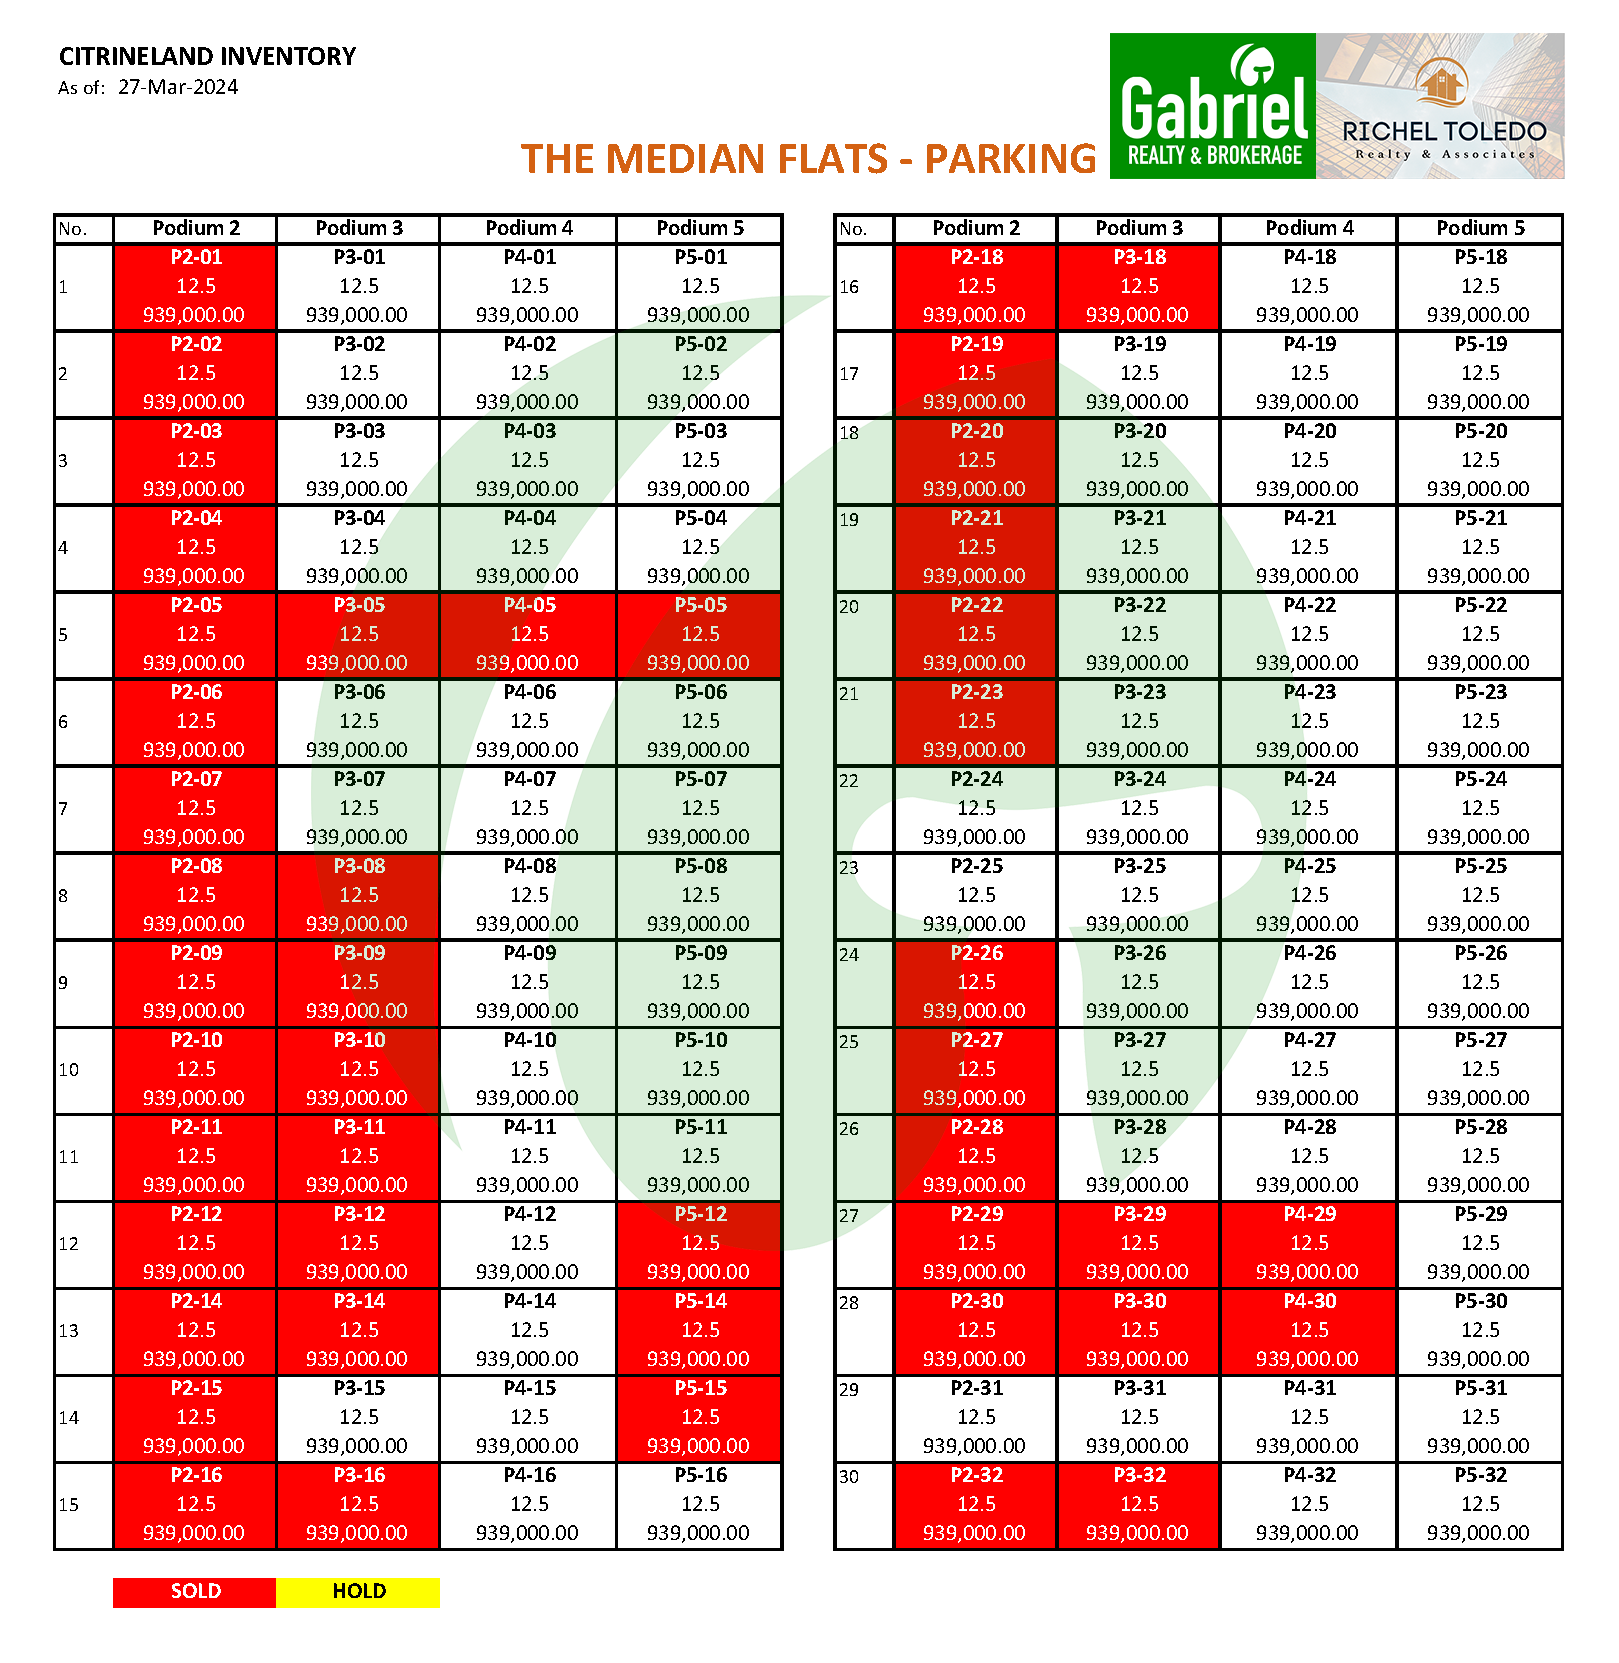 The Median Flats Parking Latest Inventory